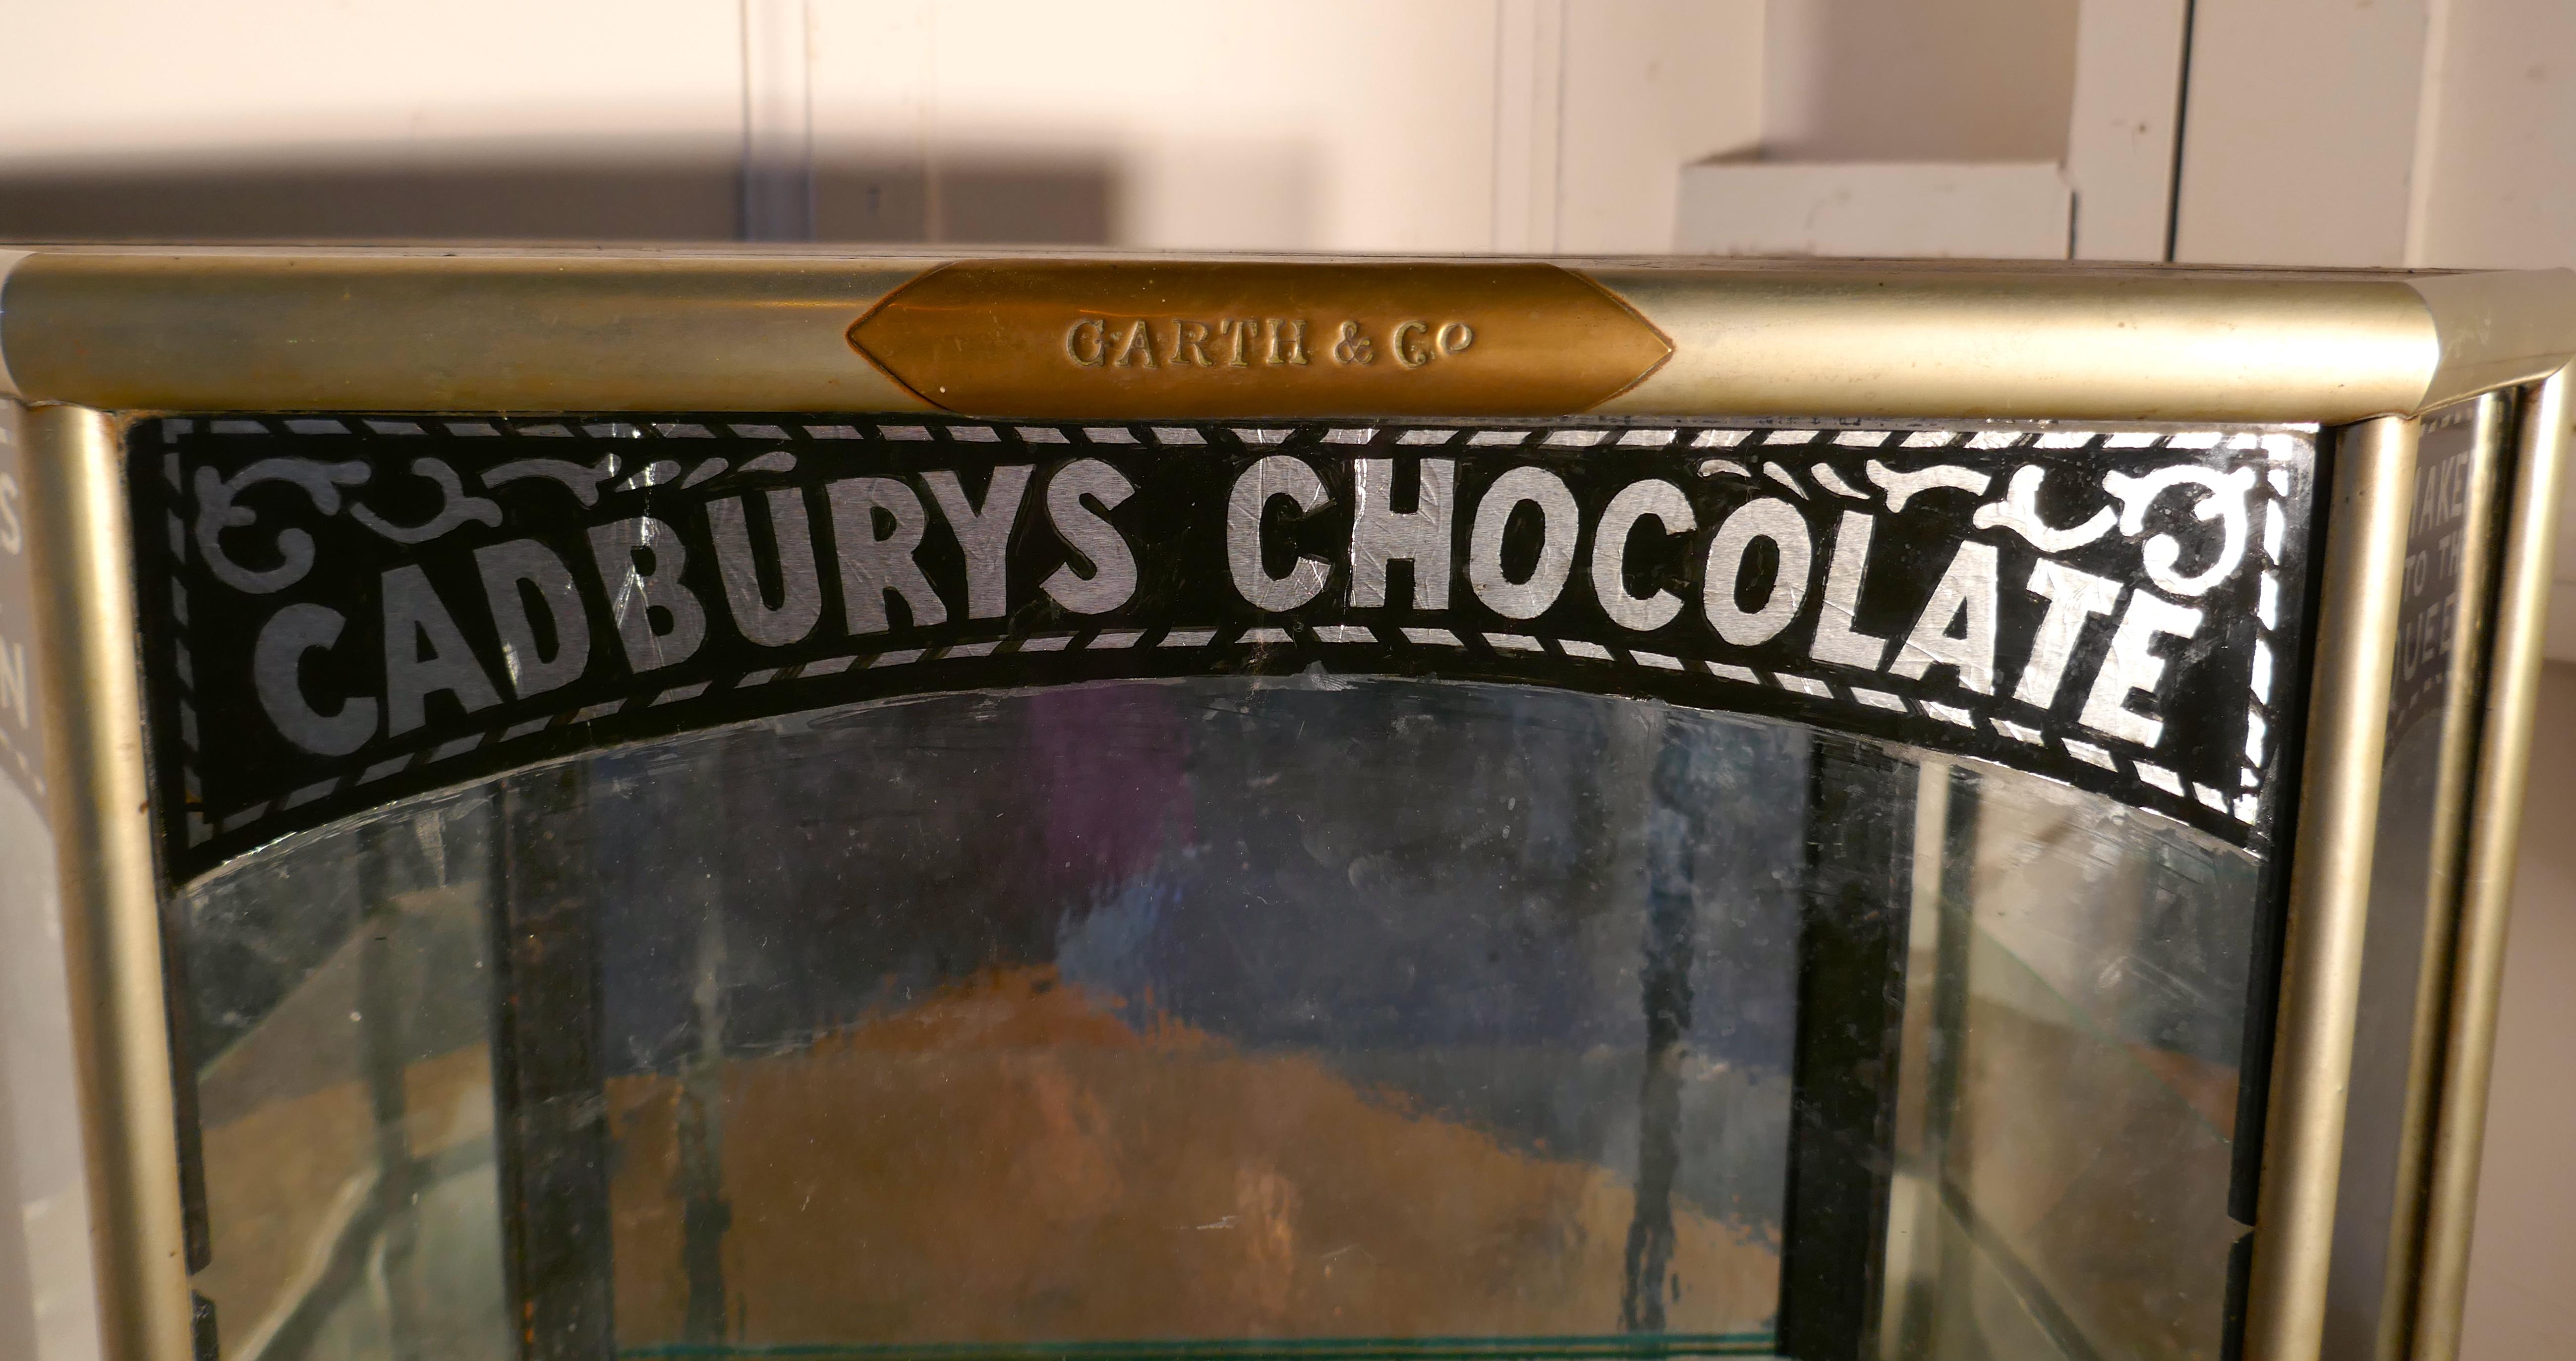 Art Deco Cadbury’s sweet shop display cabinet.

This a small but charming Cadbury’s sweet shop display cabinet it is a counter top piece, it is in the shape of a Convex Hexagon, with a small door at each end,
The cabinet has a chrome trimmed